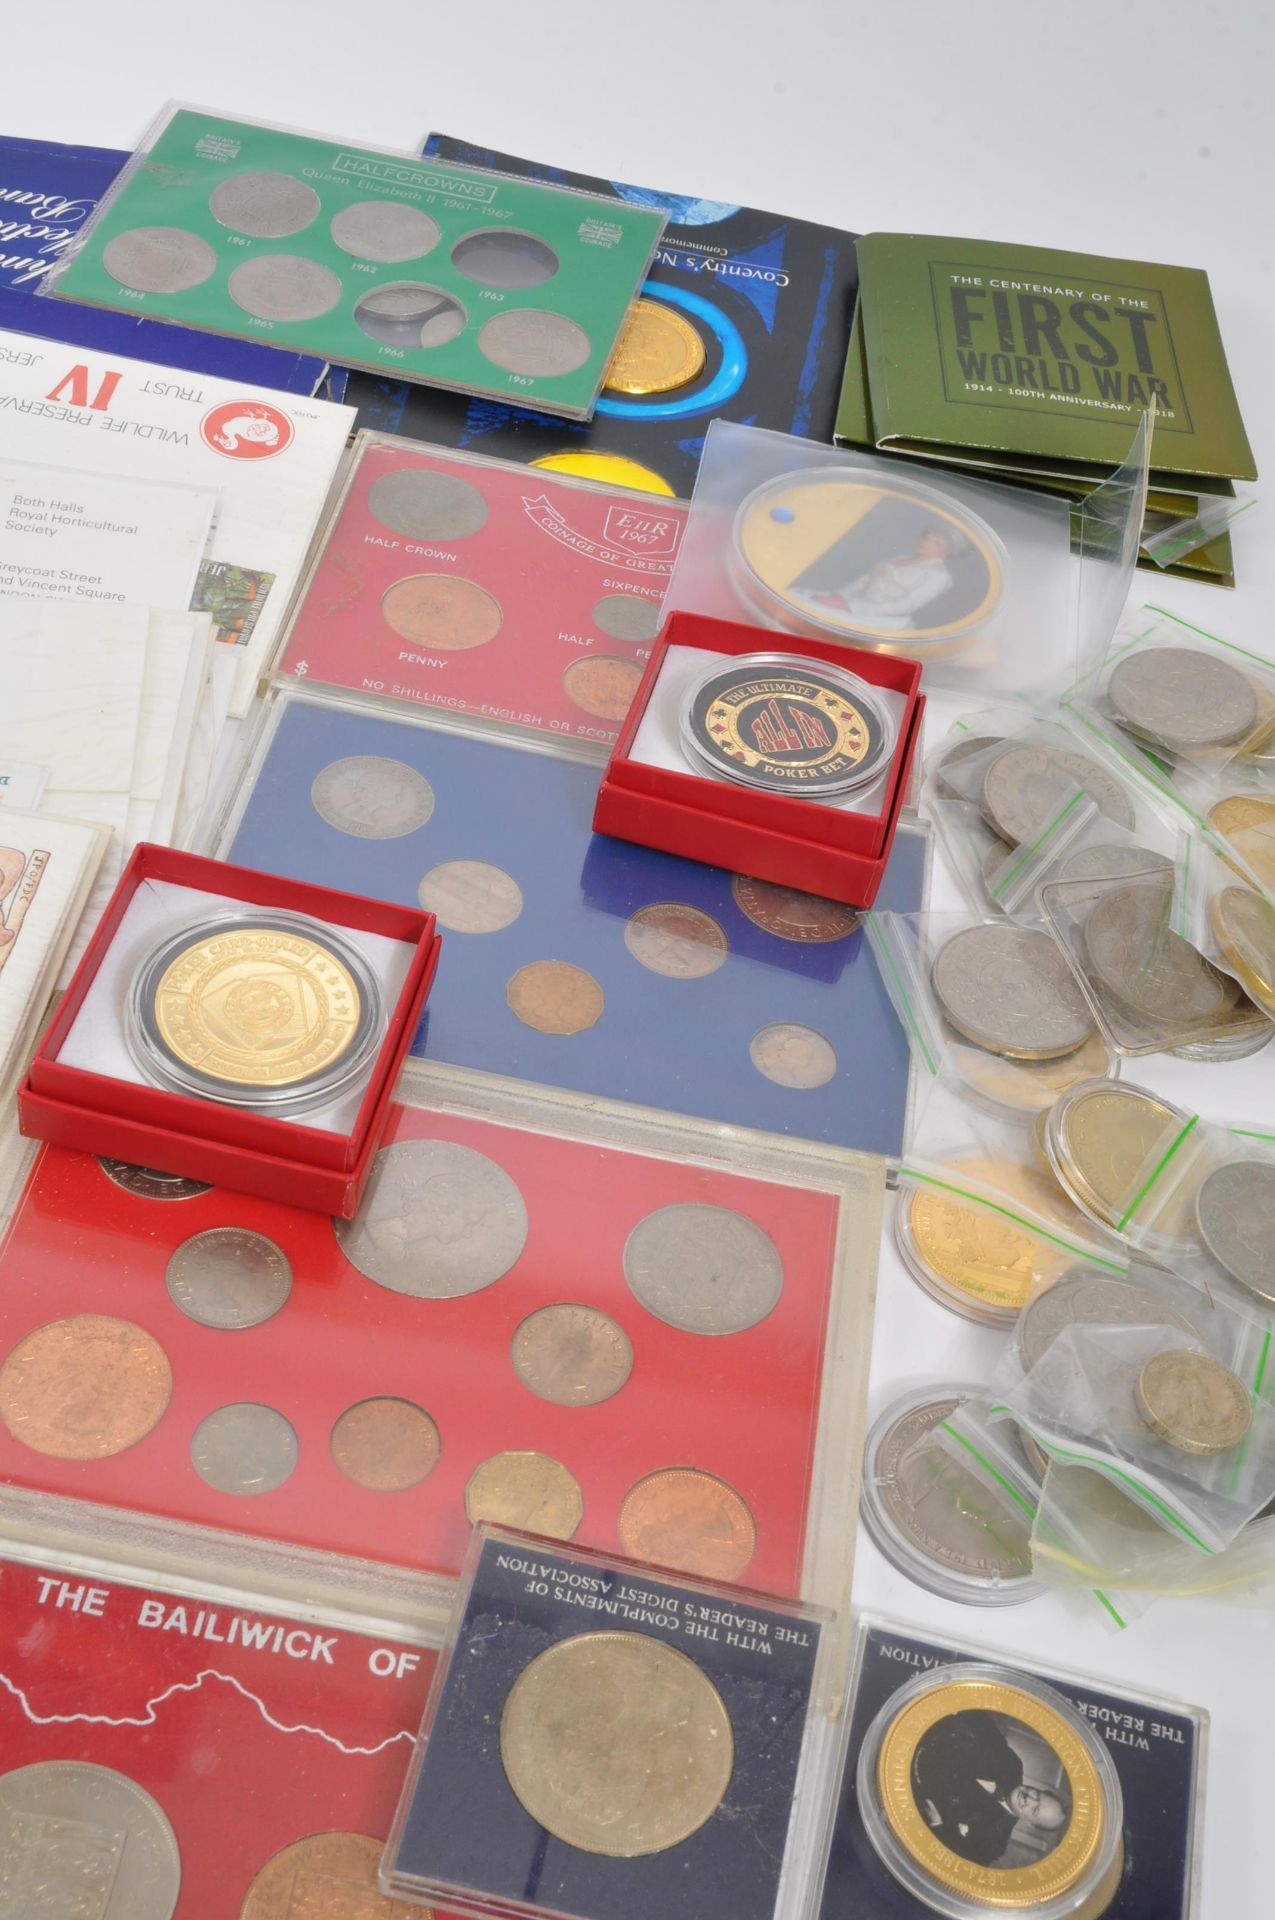 LARGE COLLECTION OF VINTAGE COMMEMORATIVE COINS & STAMPS - Image 2 of 6